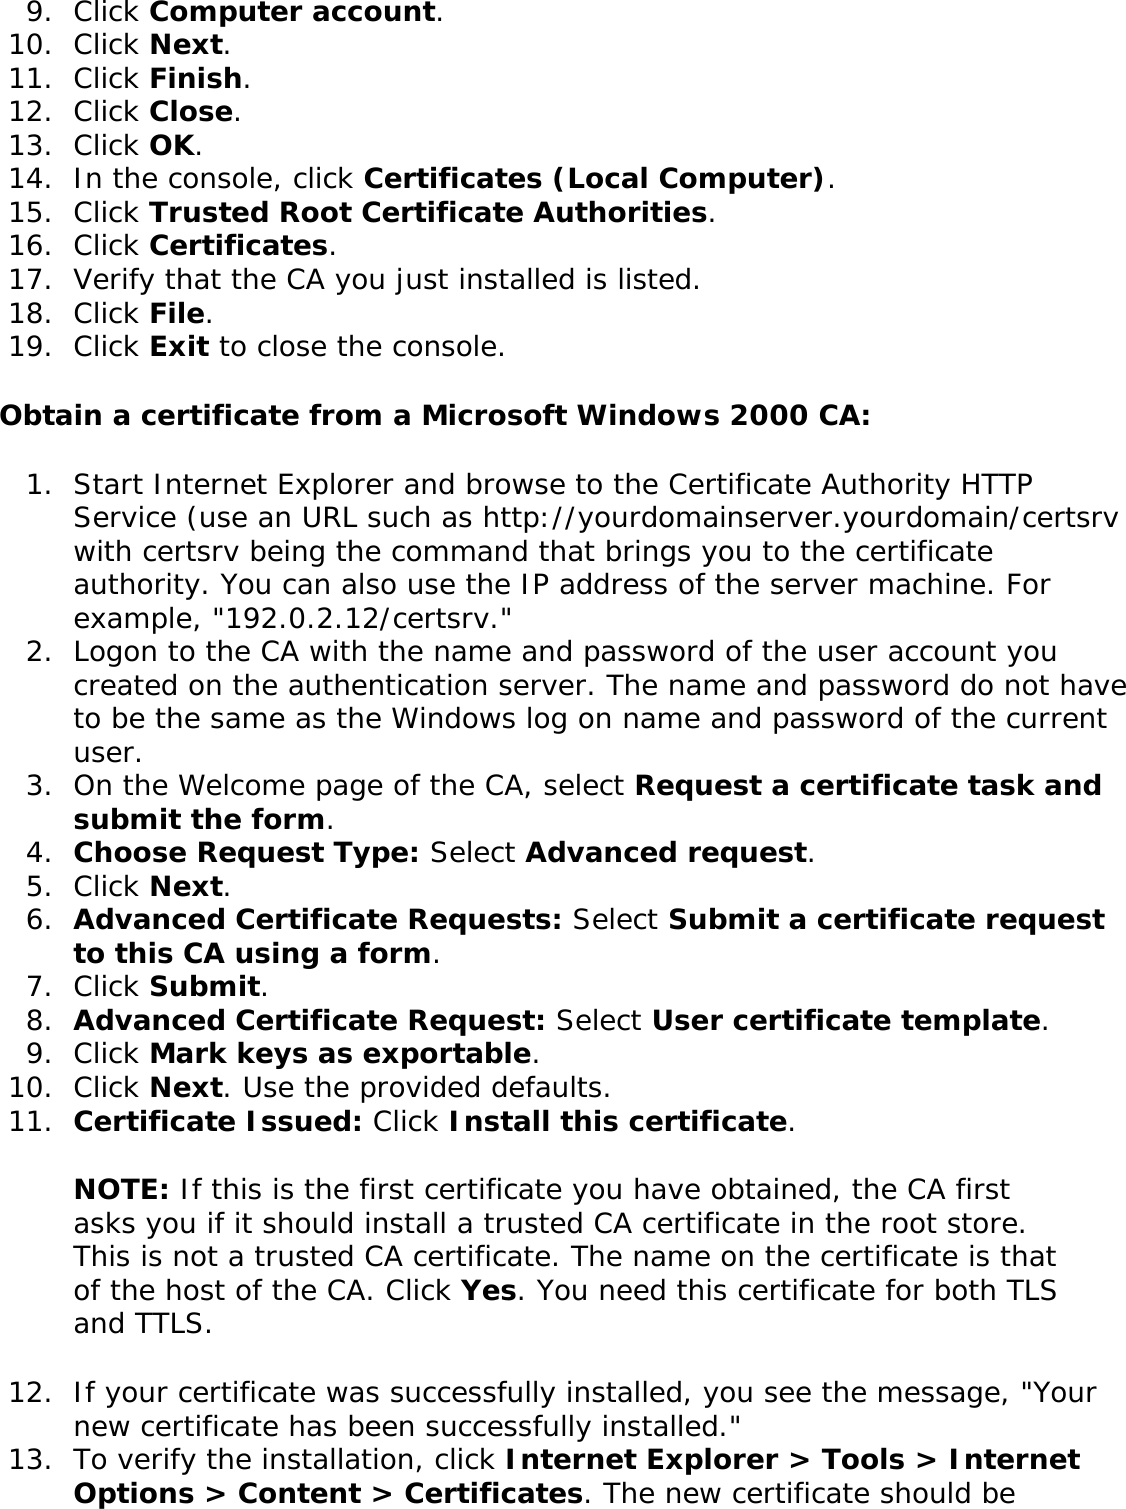 9.  Click Computer account.10.  Click Next.11.  Click Finish.12.  Click Close.13.  Click OK.14.  In the console, click Certificates (Local Computer).15.  Click Trusted Root Certificate Authorities.16.  Click Certificates.17.  Verify that the CA you just installed is listed.18.  Click File.19.  Click Exit to close the console.Obtain a certificate from a Microsoft Windows 2000 CA: 1.  Start Internet Explorer and browse to the Certificate Authority HTTP Service (use an URL such as http://yourdomainserver.yourdomain/certsrv with certsrv being the command that brings you to the certificate authority. You can also use the IP address of the server machine. For example, &quot;192.0.2.12/certsrv.&quot;2.  Logon to the CA with the name and password of the user account you created on the authentication server. The name and password do not have to be the same as the Windows log on name and password of the current user. 3.  On the Welcome page of the CA, select Request a certificate task and submit the form. 4.  Choose Request Type: Select Advanced request.5.  Click Next. 6.  Advanced Certificate Requests: Select Submit a certificate request to this CA using a form.7.  Click Submit. 8.  Advanced Certificate Request: Select User certificate template. 9.  Click Mark keys as exportable.10.  Click Next. Use the provided defaults. 11.  Certificate Issued: Click Install this certificate.NOTE: If this is the first certificate you have obtained, the CA first asks you if it should install a trusted CA certificate in the root store. This is not a trusted CA certificate. The name on the certificate is that of the host of the CA. Click Yes. You need this certificate for both TLS and TTLS. 12.  If your certificate was successfully installed, you see the message, &quot;Your new certificate has been successfully installed.&quot;13.  To verify the installation, click Internet Explorer &gt; Tools &gt; Internet Options &gt; Content &gt; Certificates. The new certificate should be 